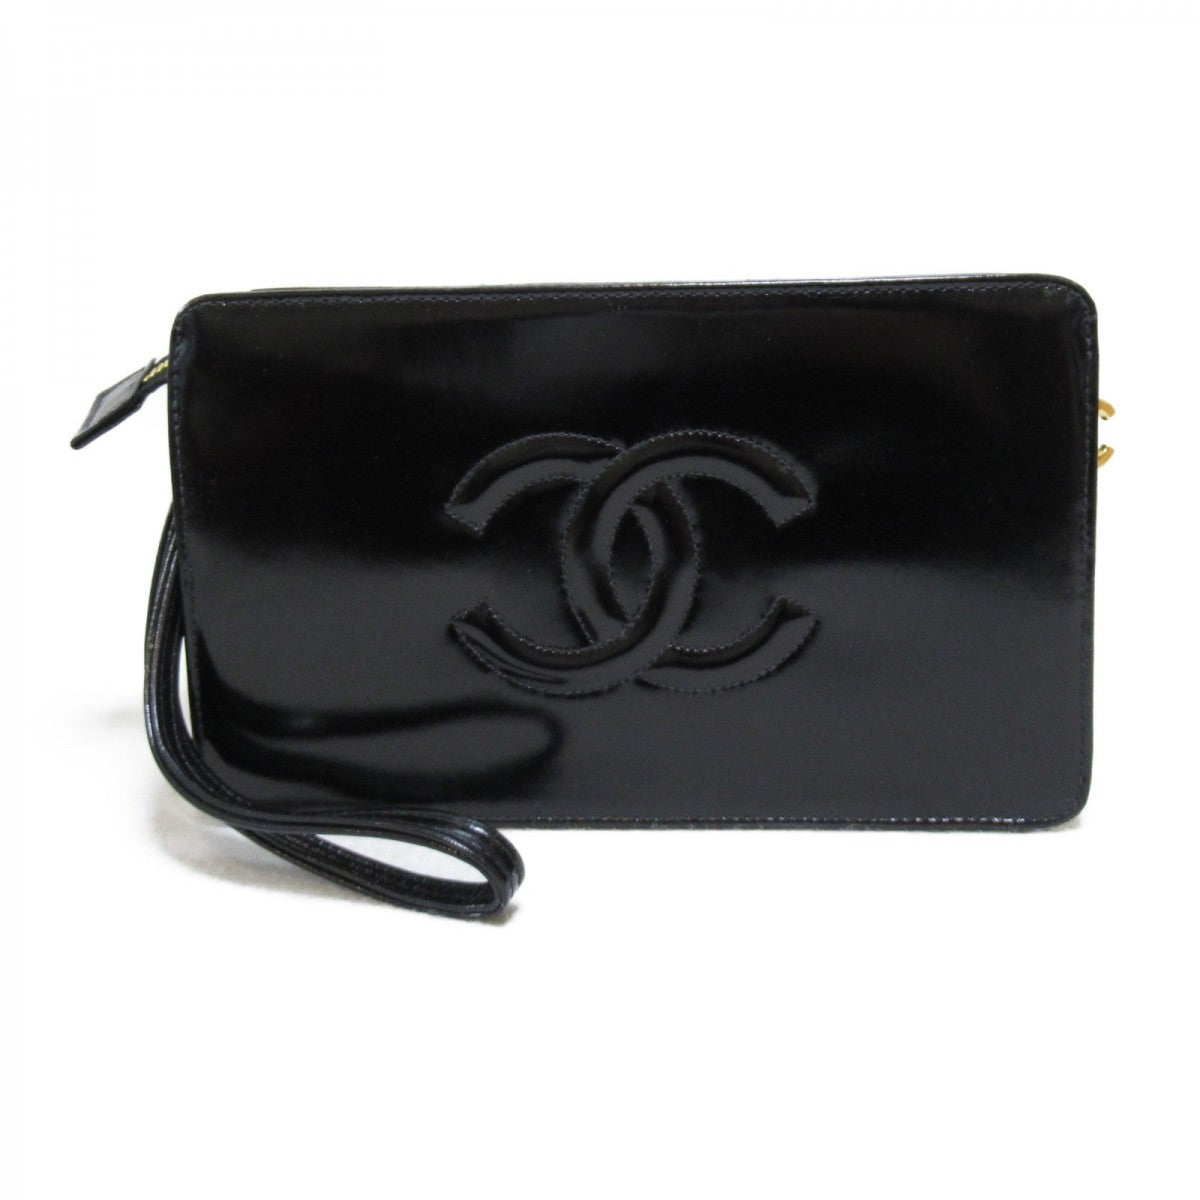 CC Quilted Leather Clutch Bag